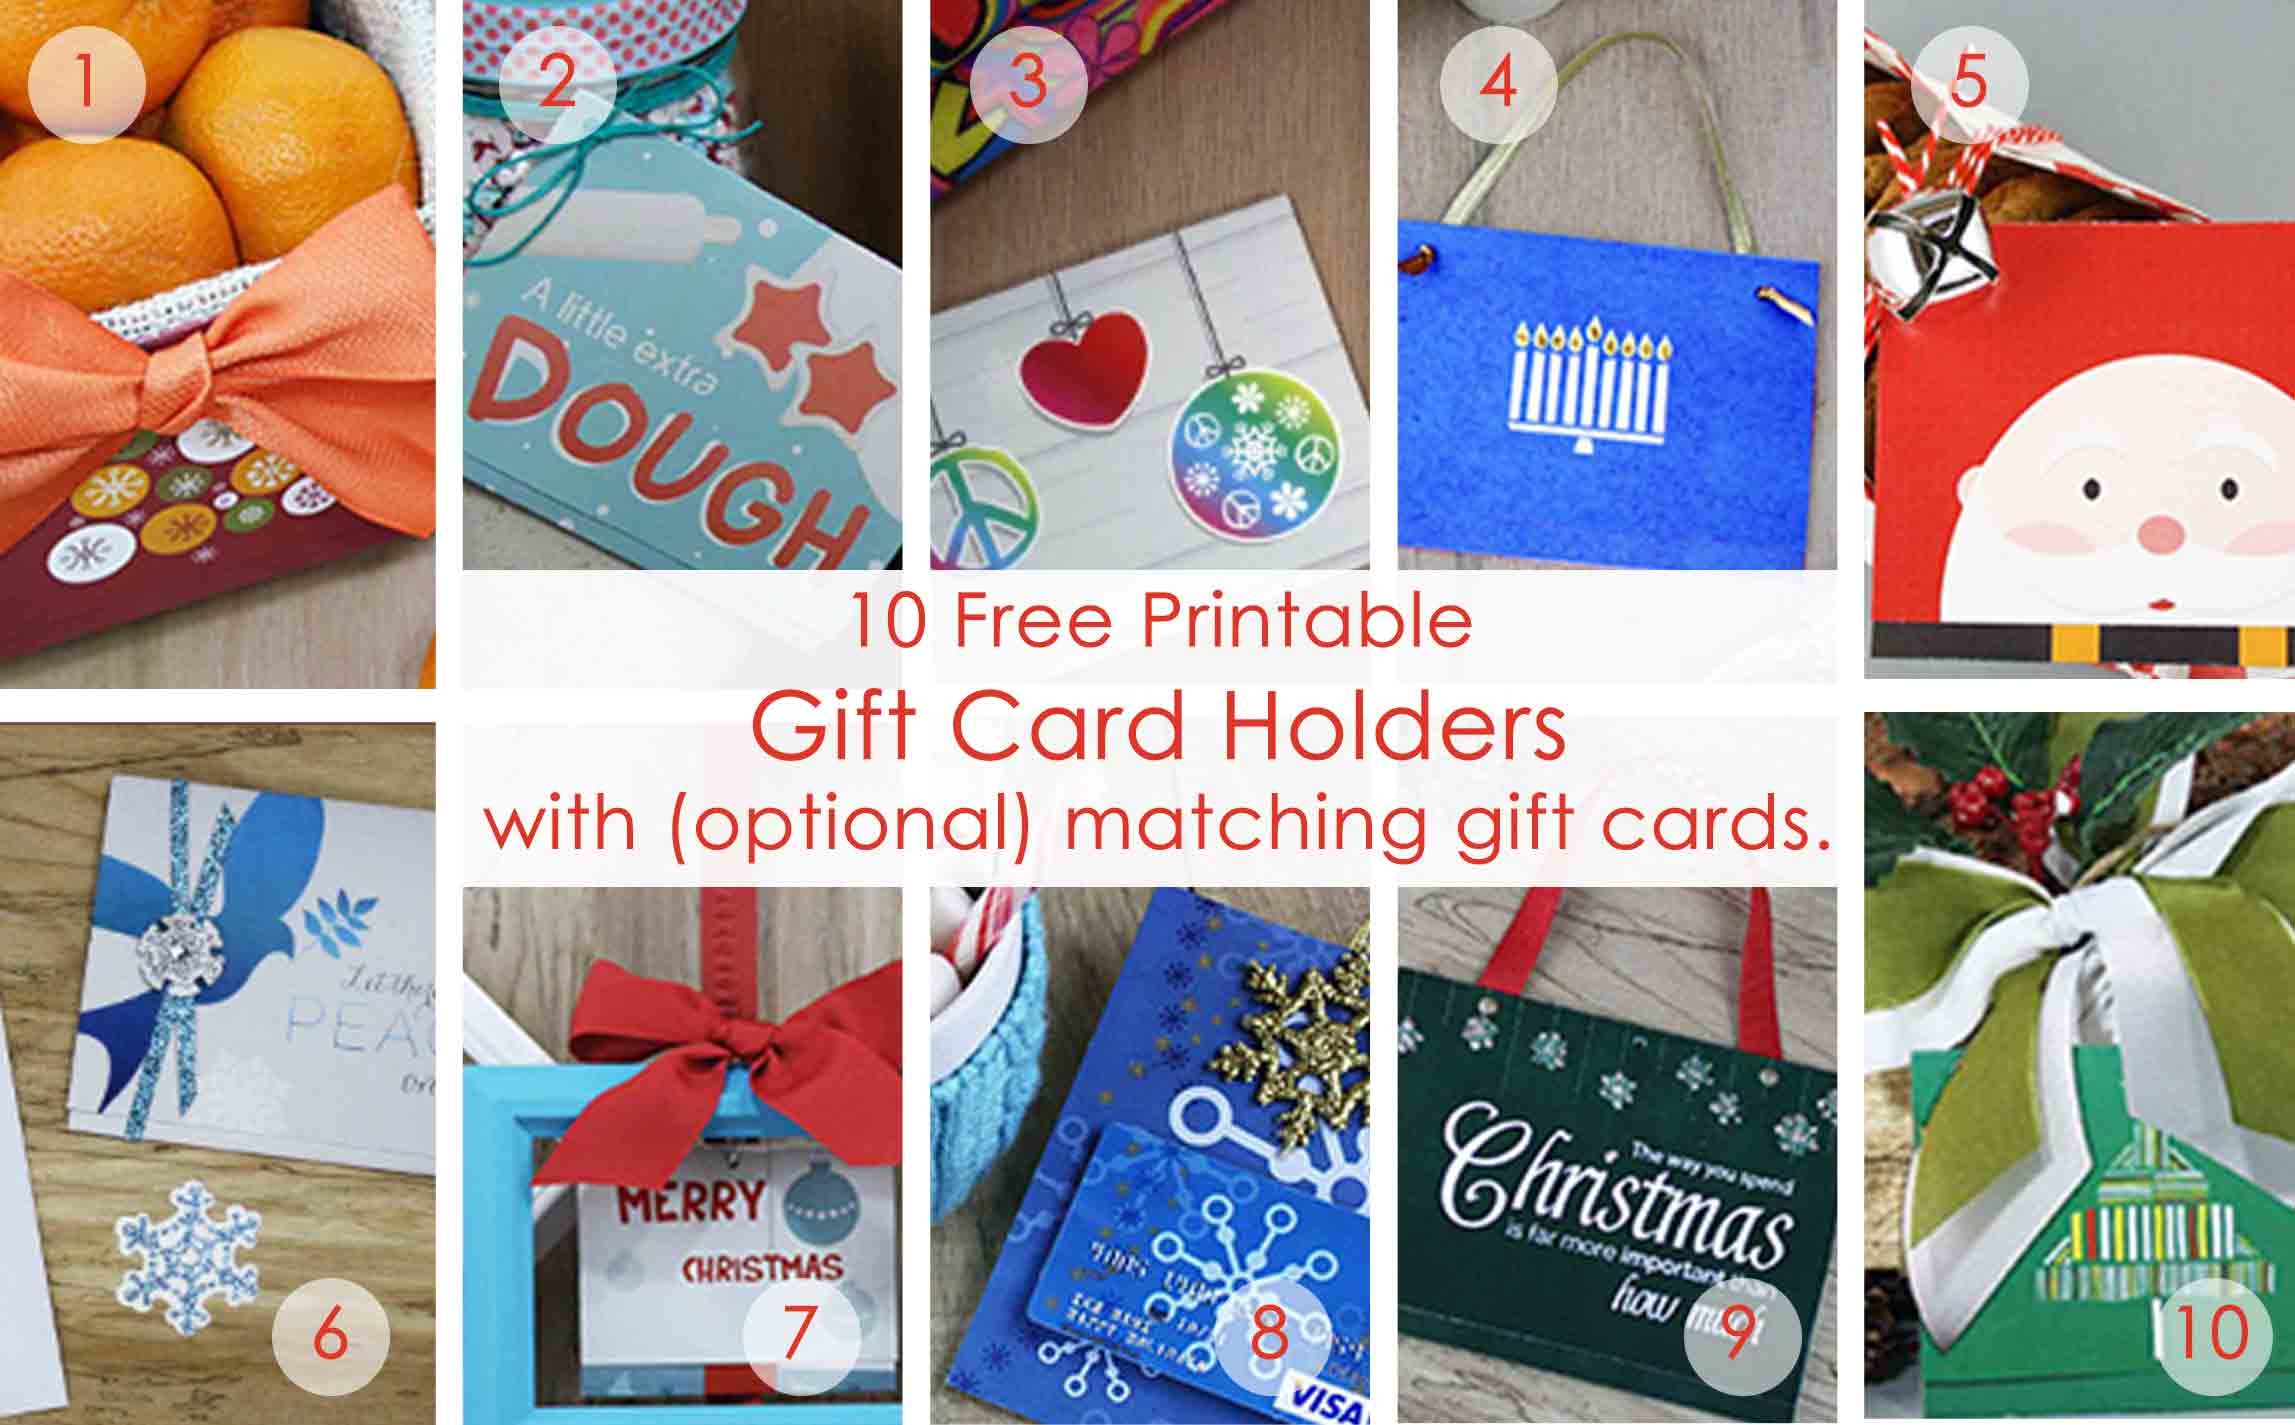 Over 50 Printable Gift Card Holders For The Holidays | Gcg - Free Printable Money Cards For Birthdays